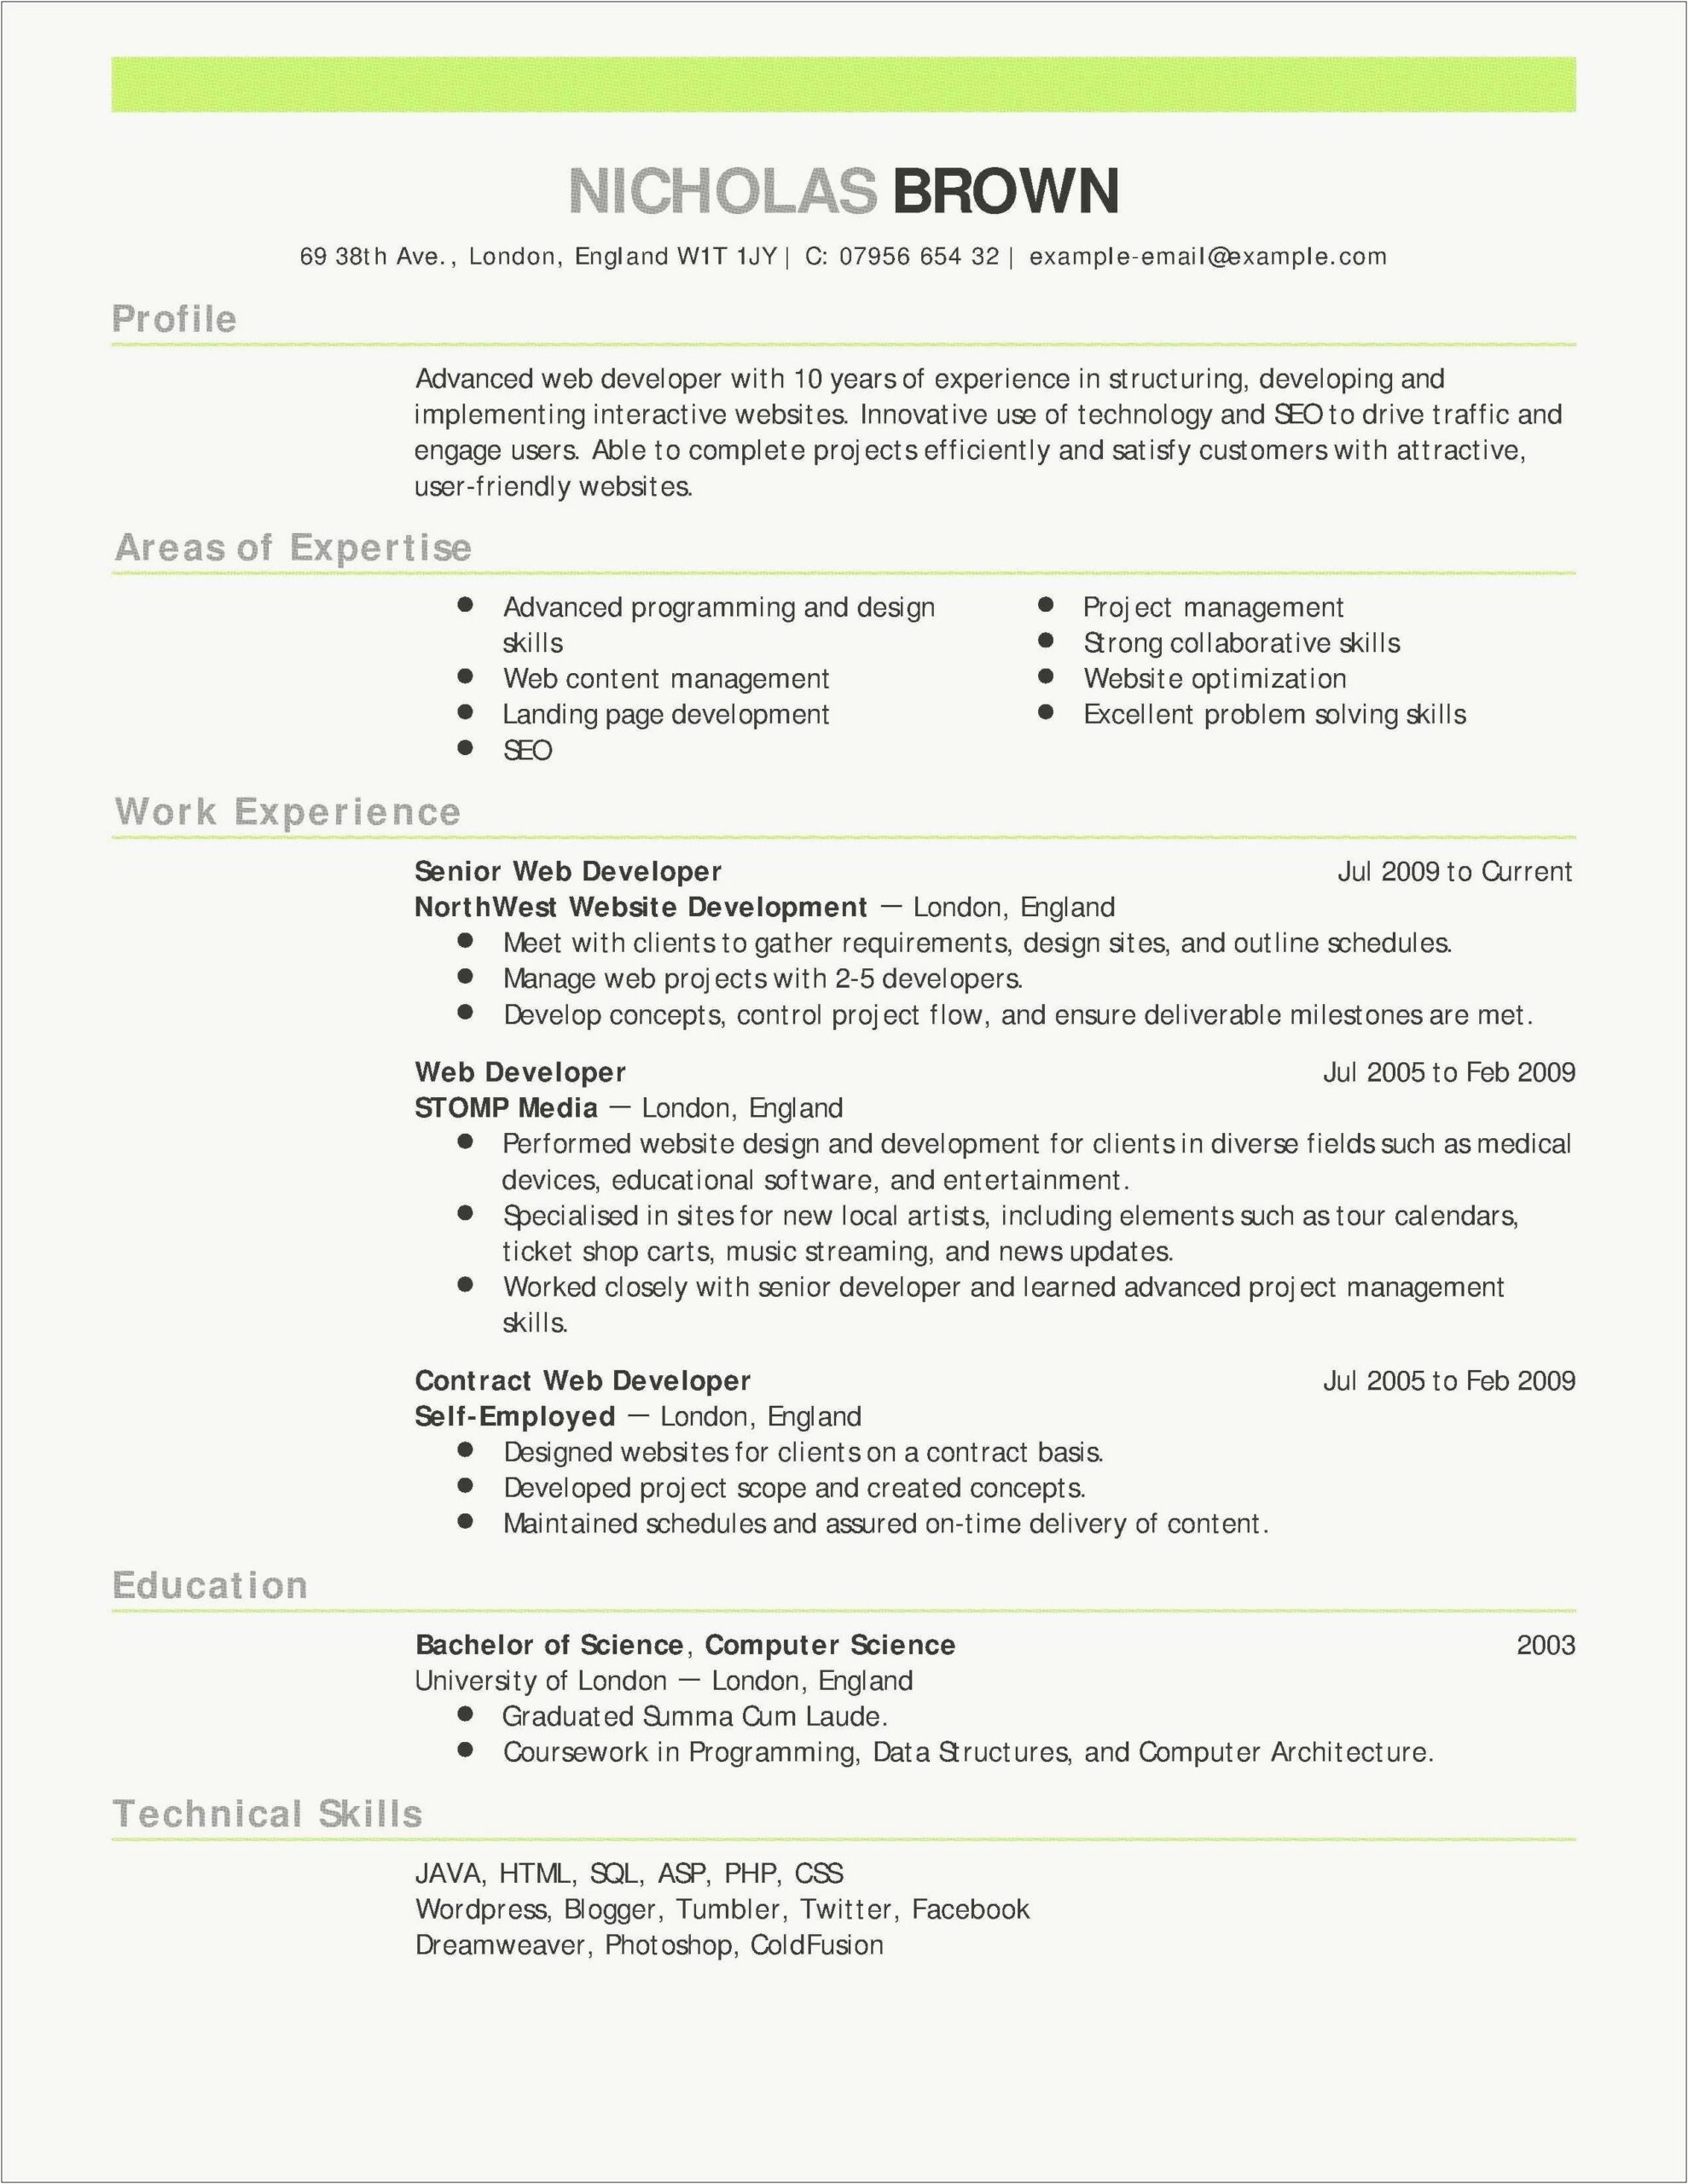 Examples Of Abilities Statement On Resume